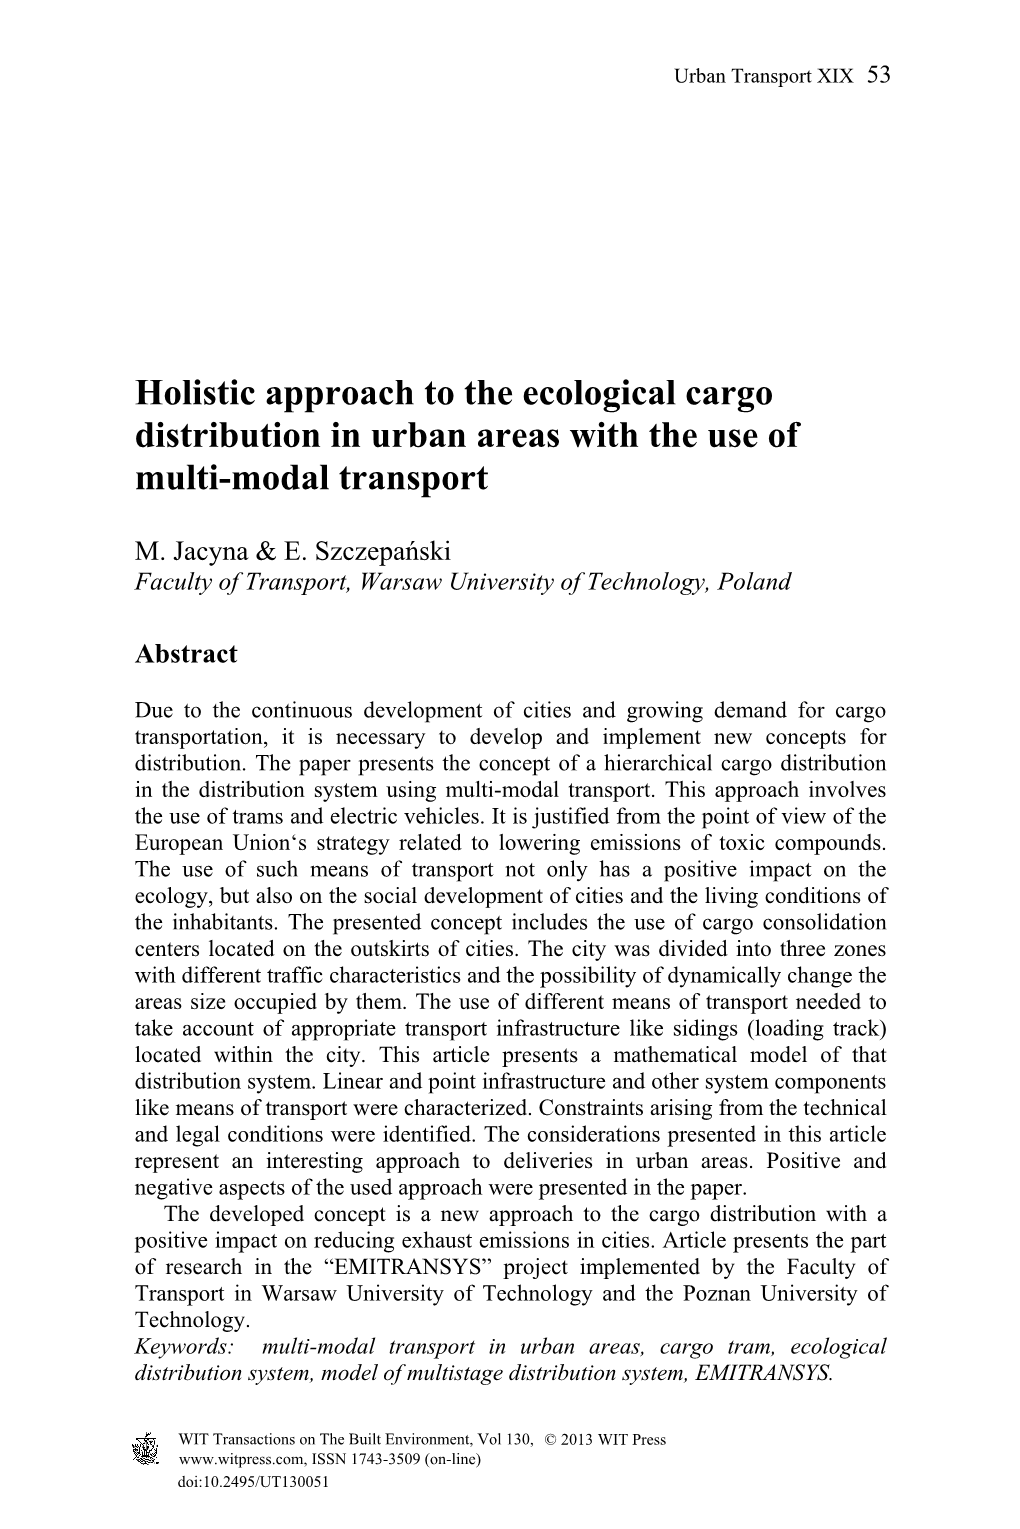 Holistic Approach to the Ecological Cargo Distribution in Urban Areas with the Use of Multi-Modal Transport